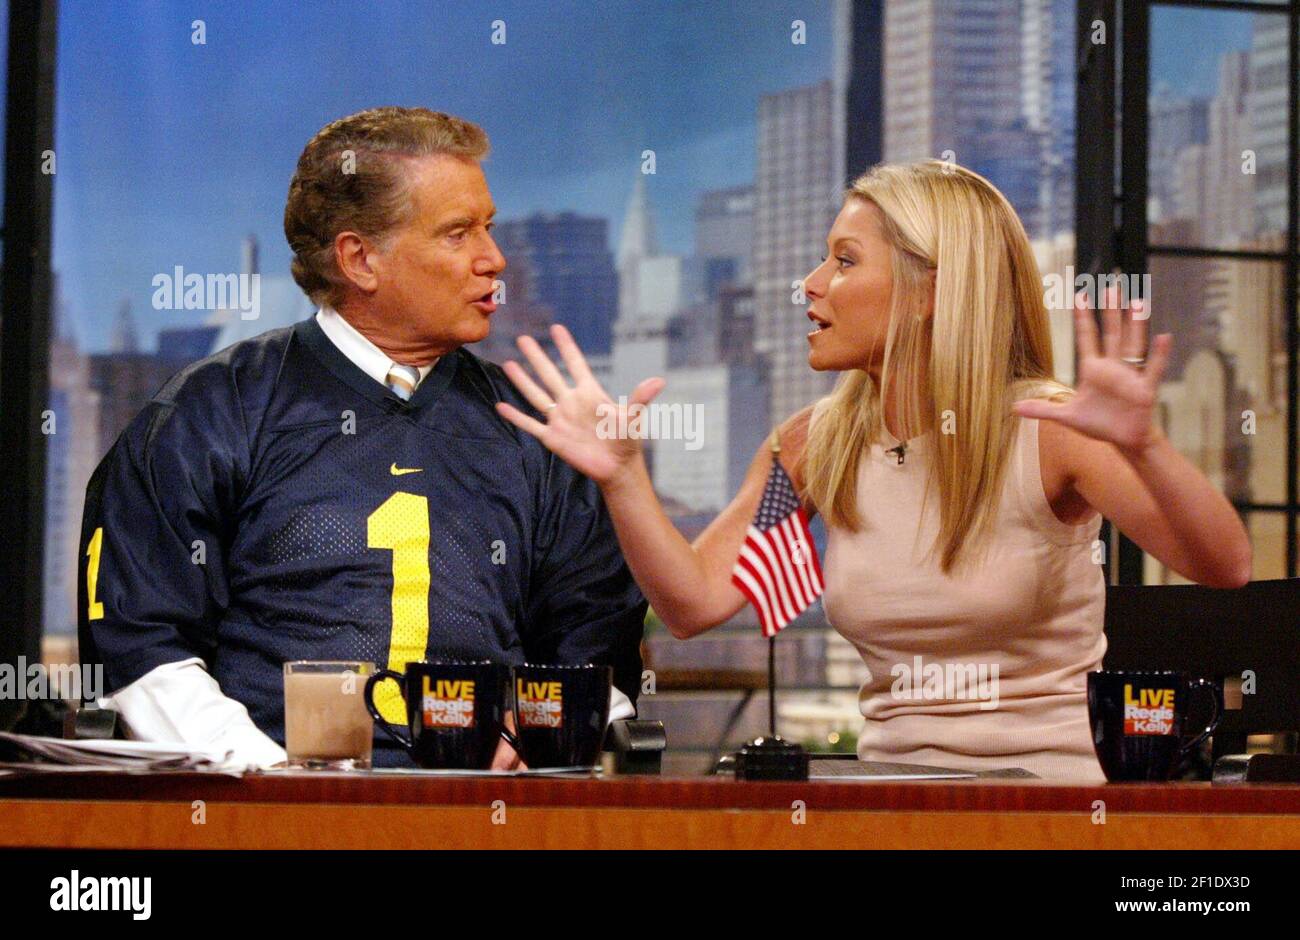 Sep 16, 2003; New York, NY; Regis Philbin and Kelly Ripa on the set of 'LIVE with Regis and Kelly' at the ABC studios in Manhattan. Mandatory Credit: Eileen Blass-USA TODAY/Sipa USA Stock Photo